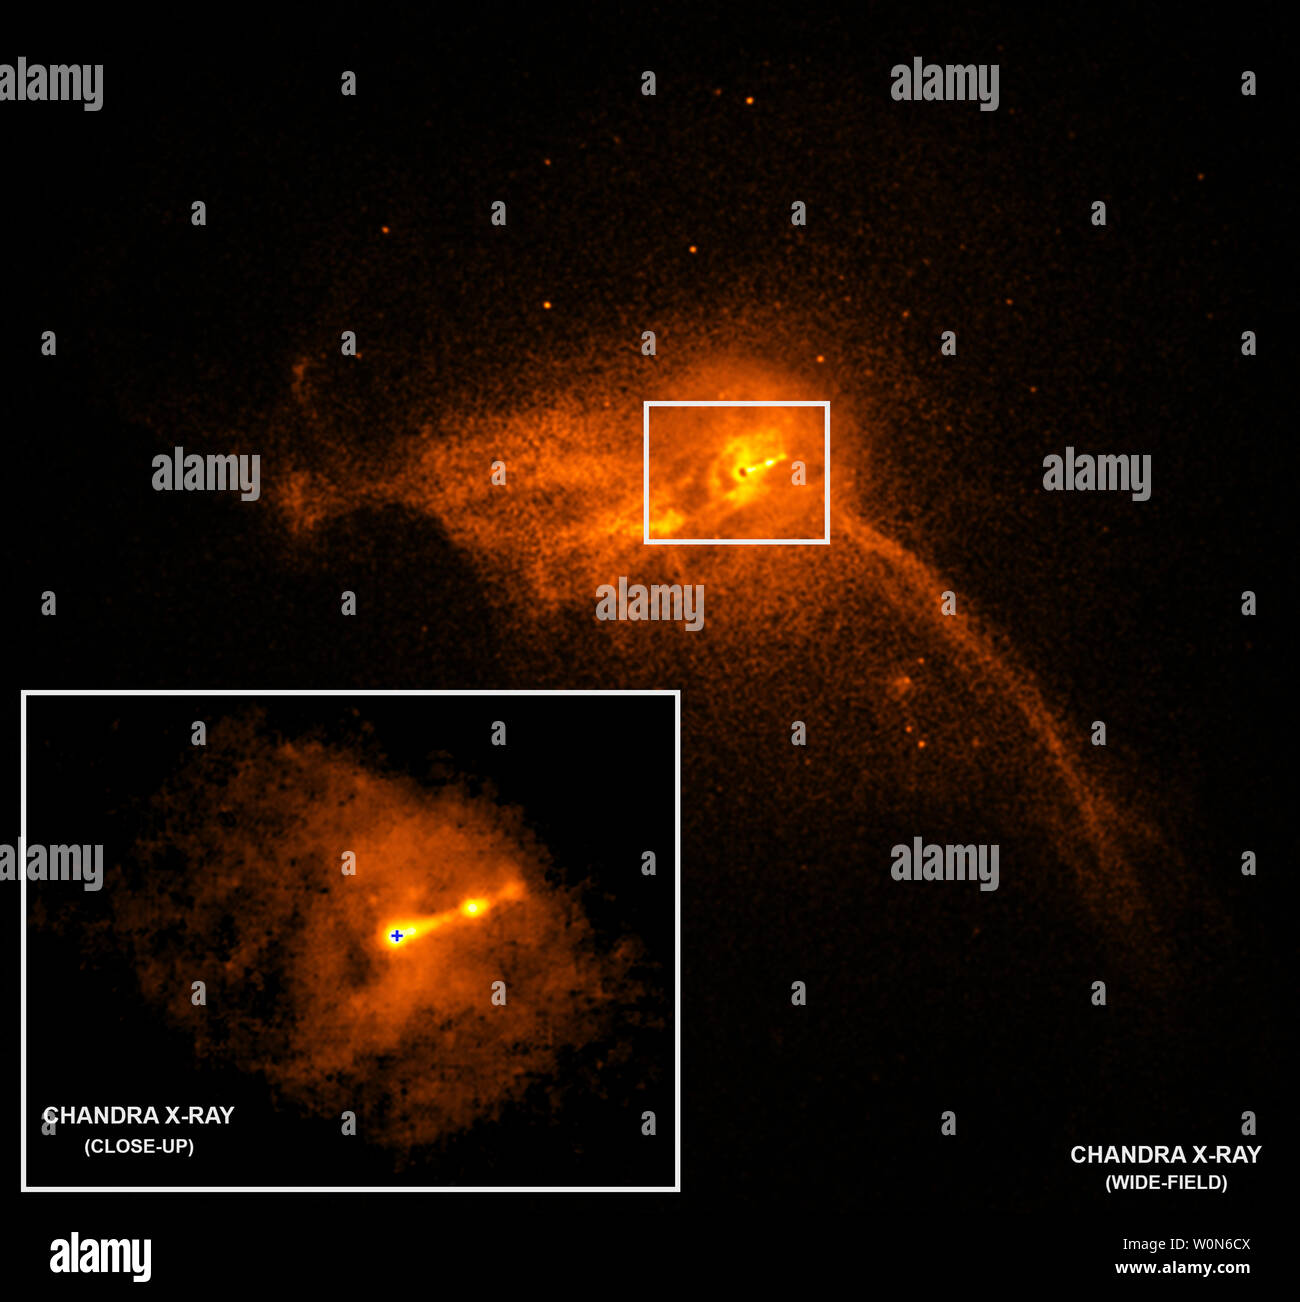 Scientists have obtained the first image of a black hole, using ...